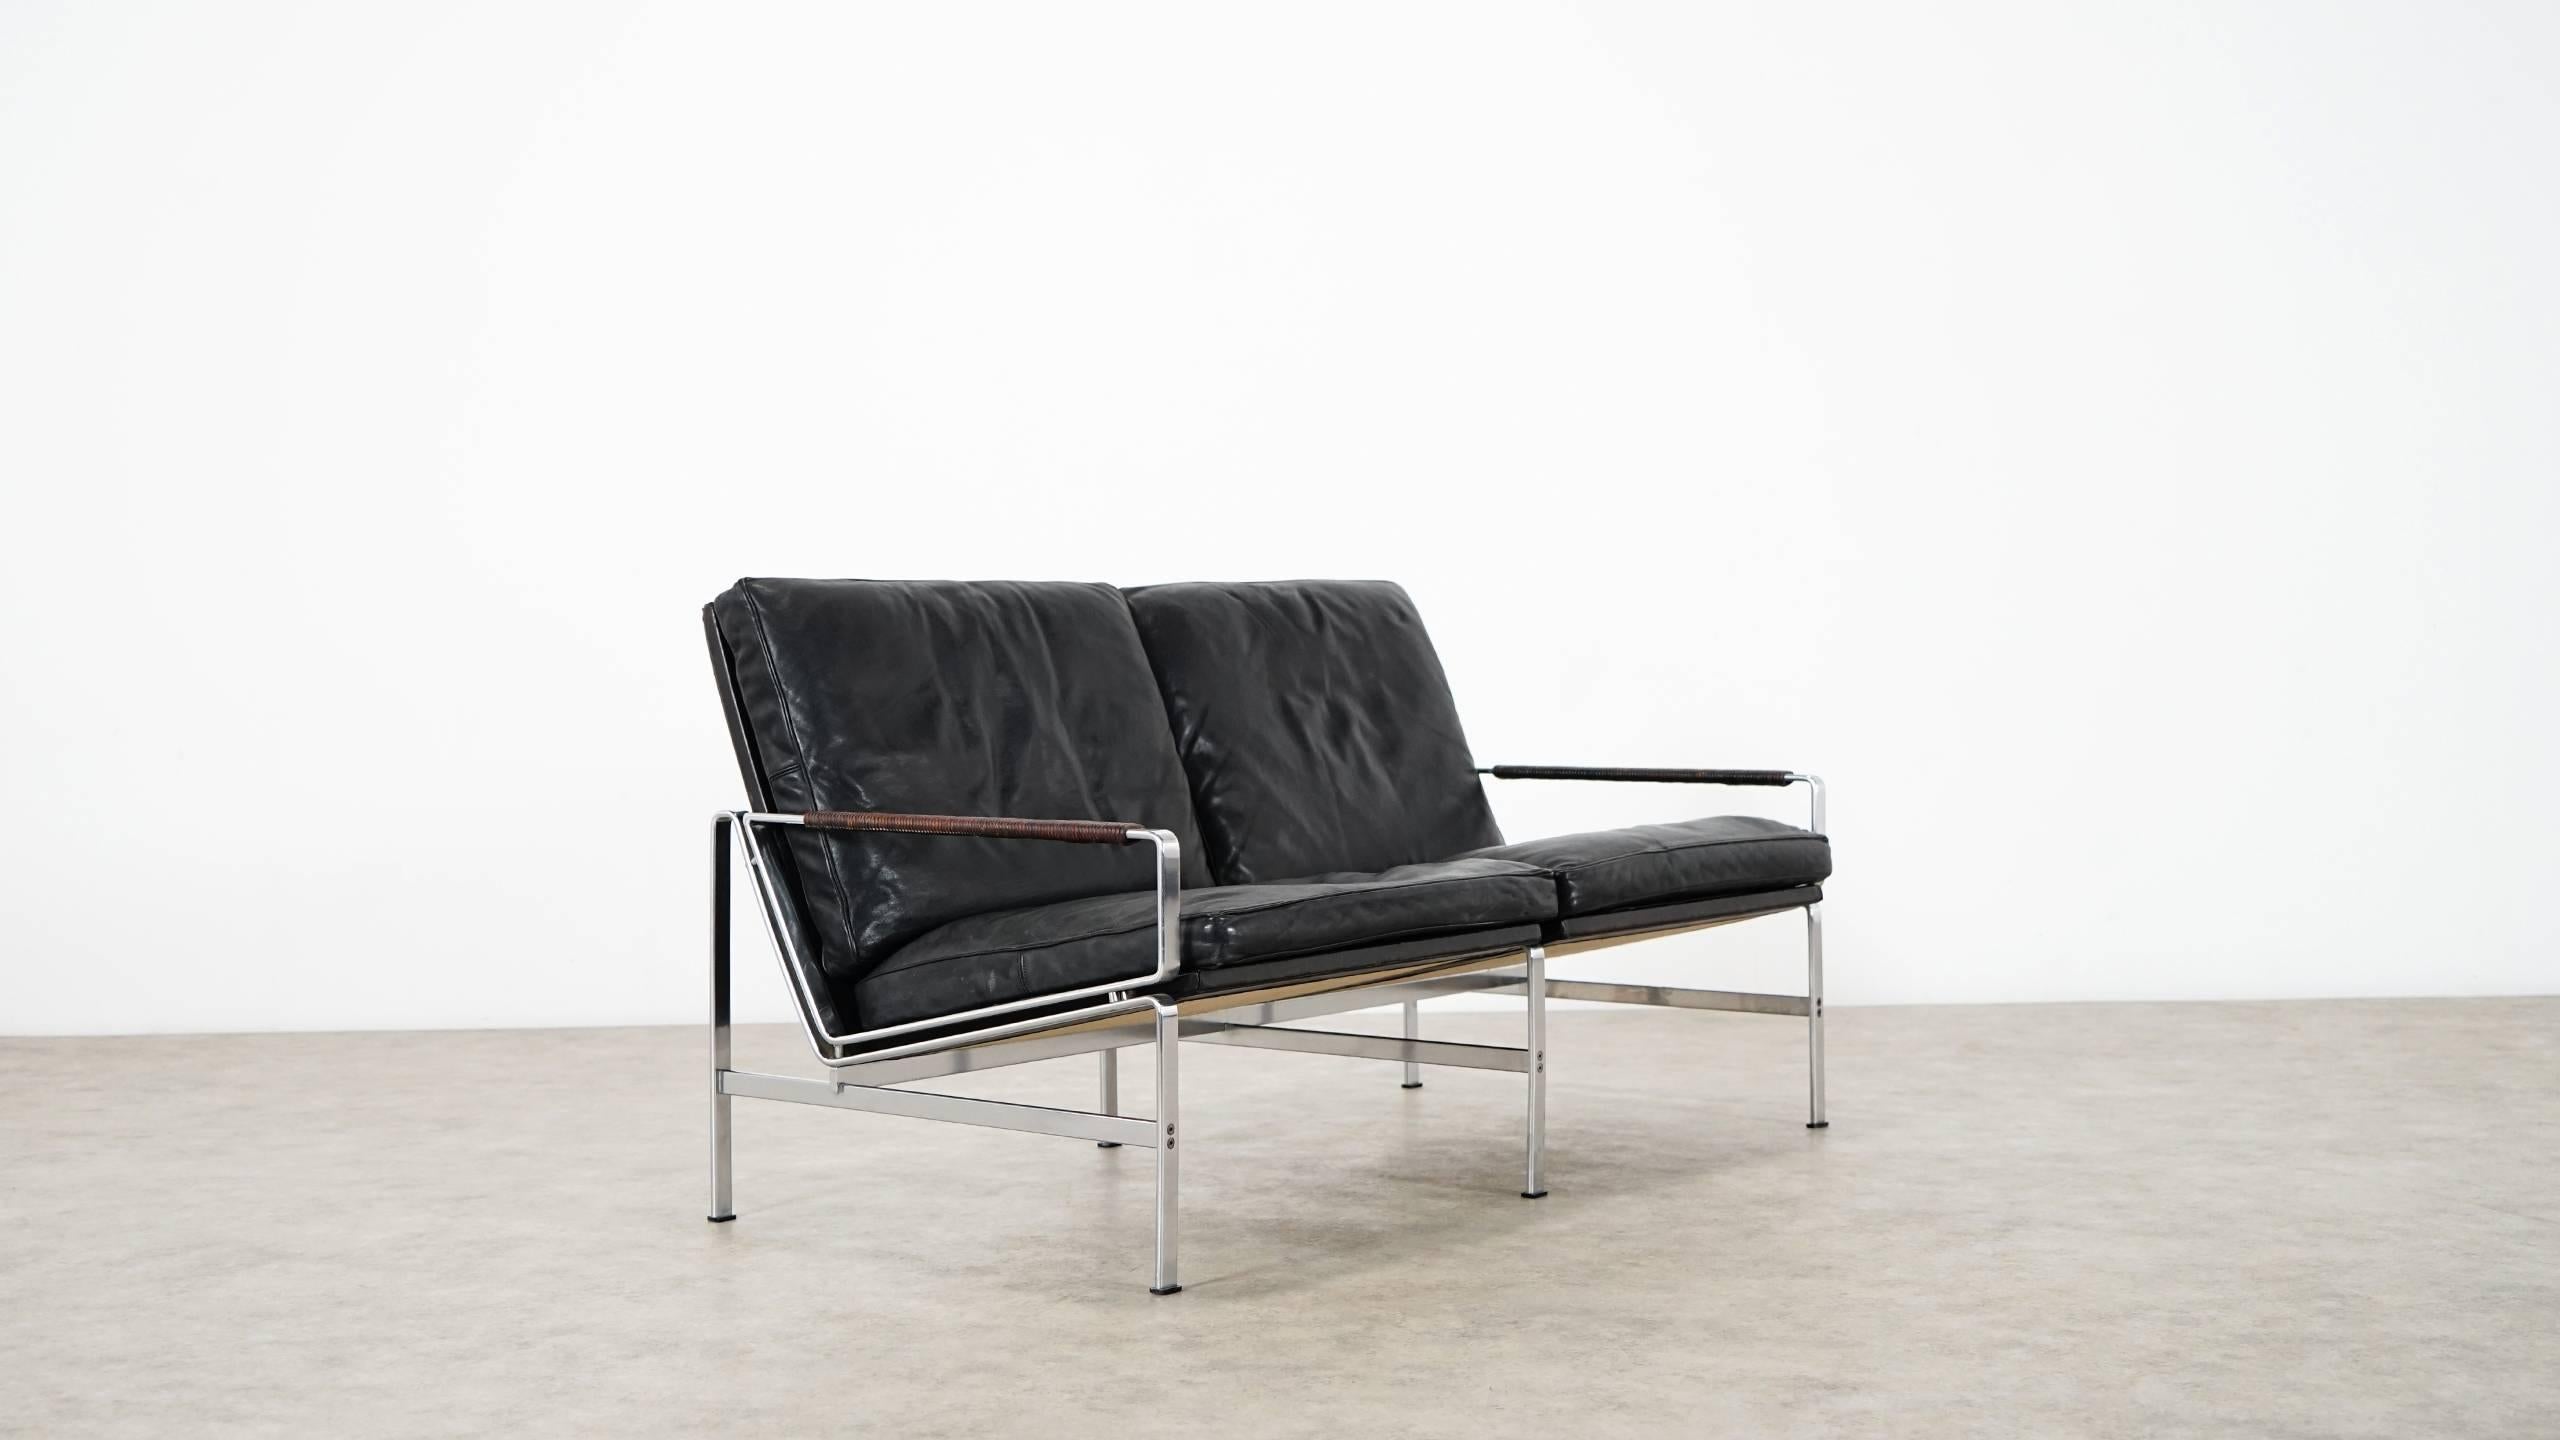 Two-seat sofa FK 6720 by Preben Fabricius & Jørgen Kastholm, designed in 1967.
Made by Kill International, Germany.

Black leather with natural patina, chromed steel frame, the armrests are wrapped with thin leather strap - a wonderful detail!